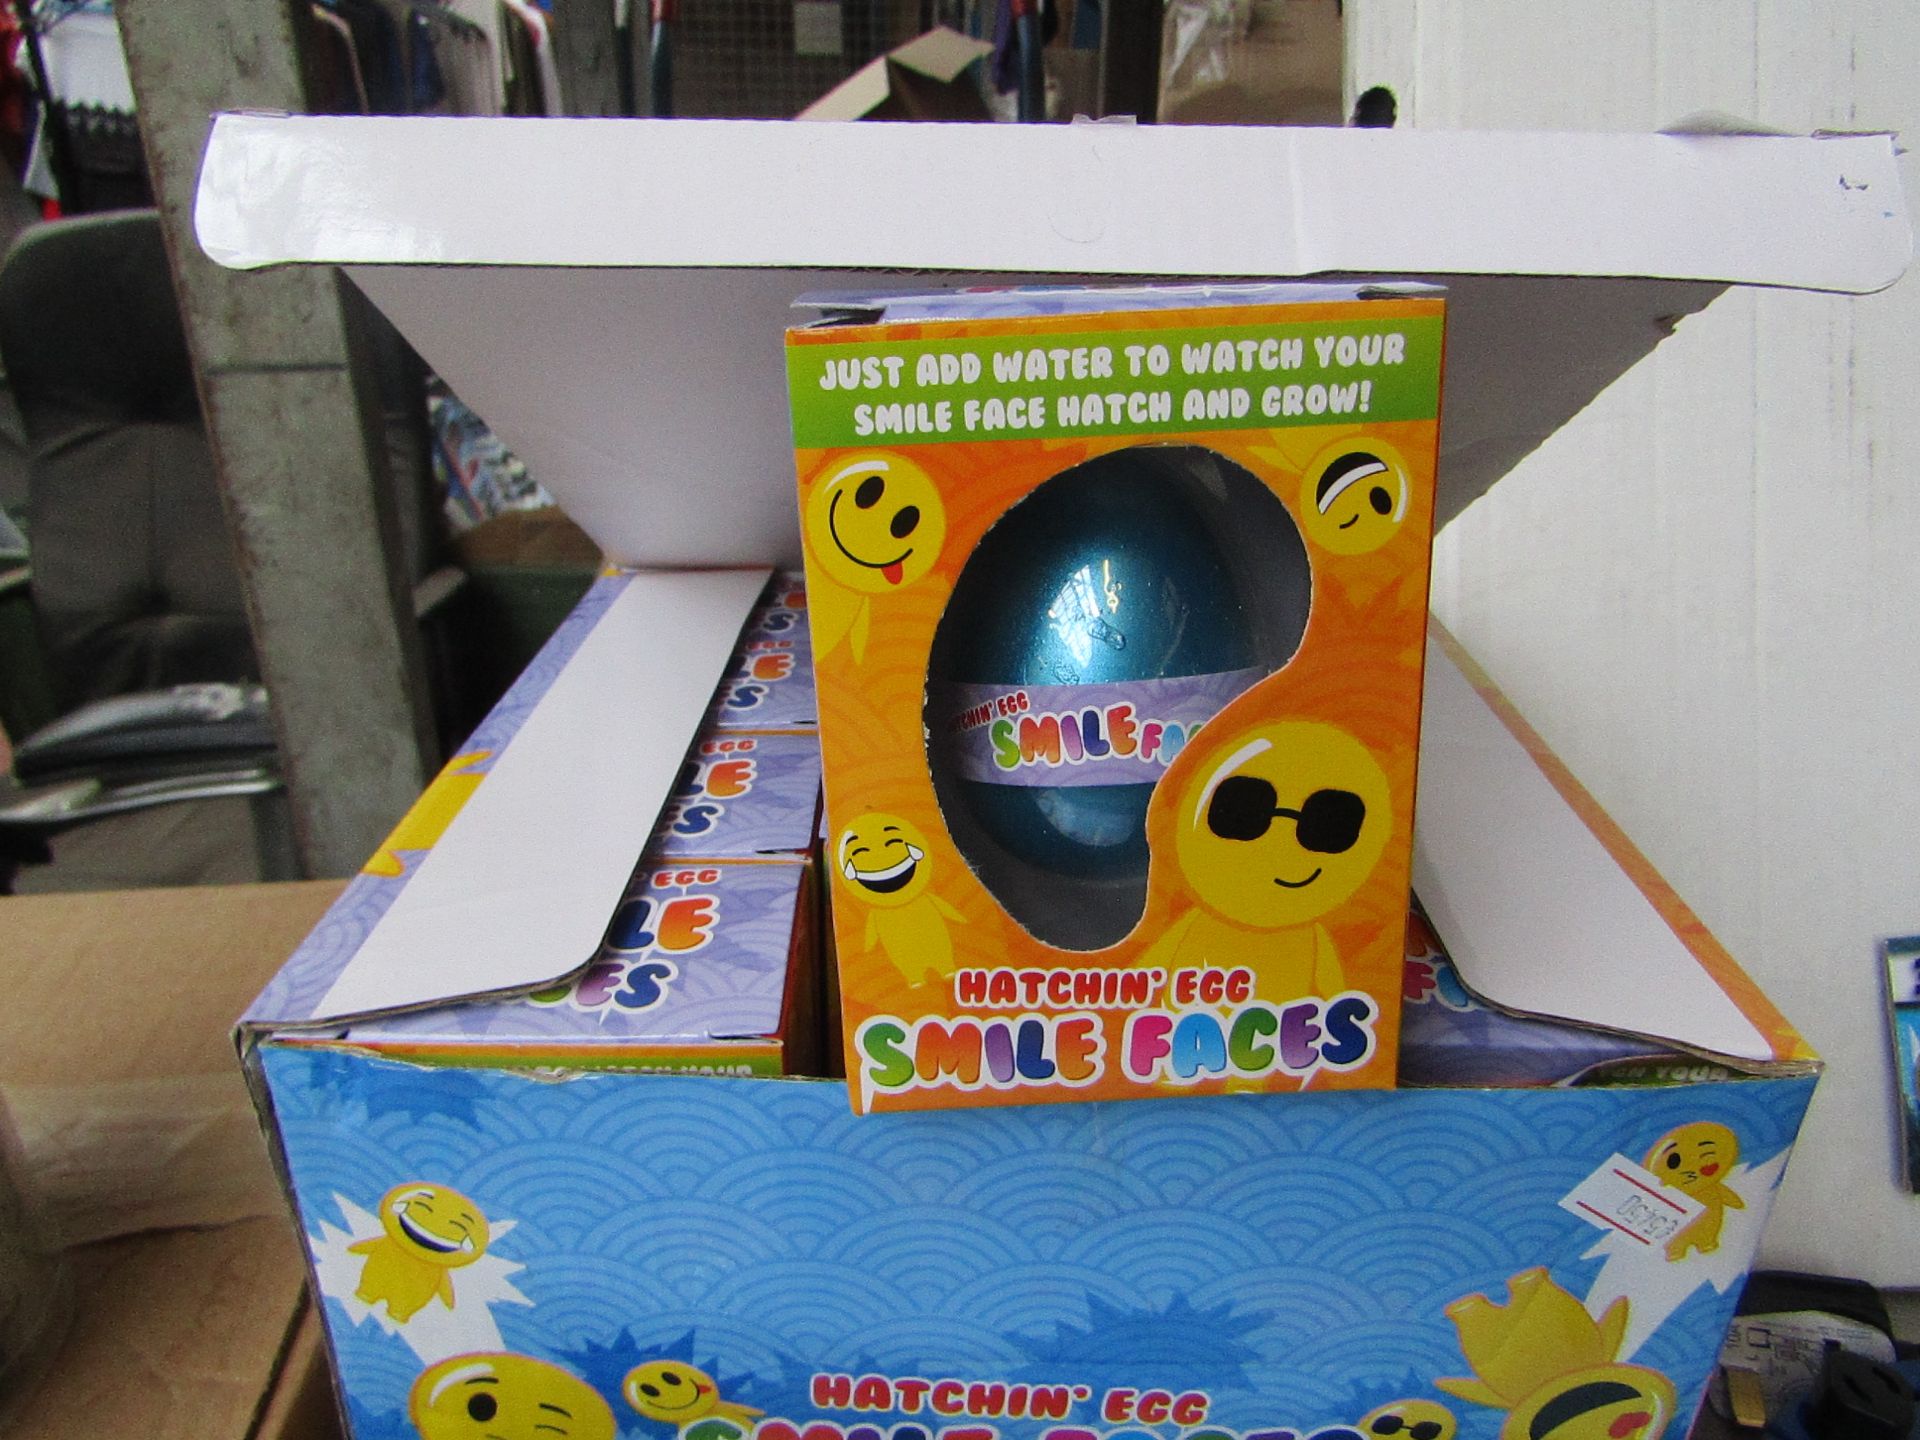 Display box of 12x Hatchin' Egg Smile Faces, new and boxed.